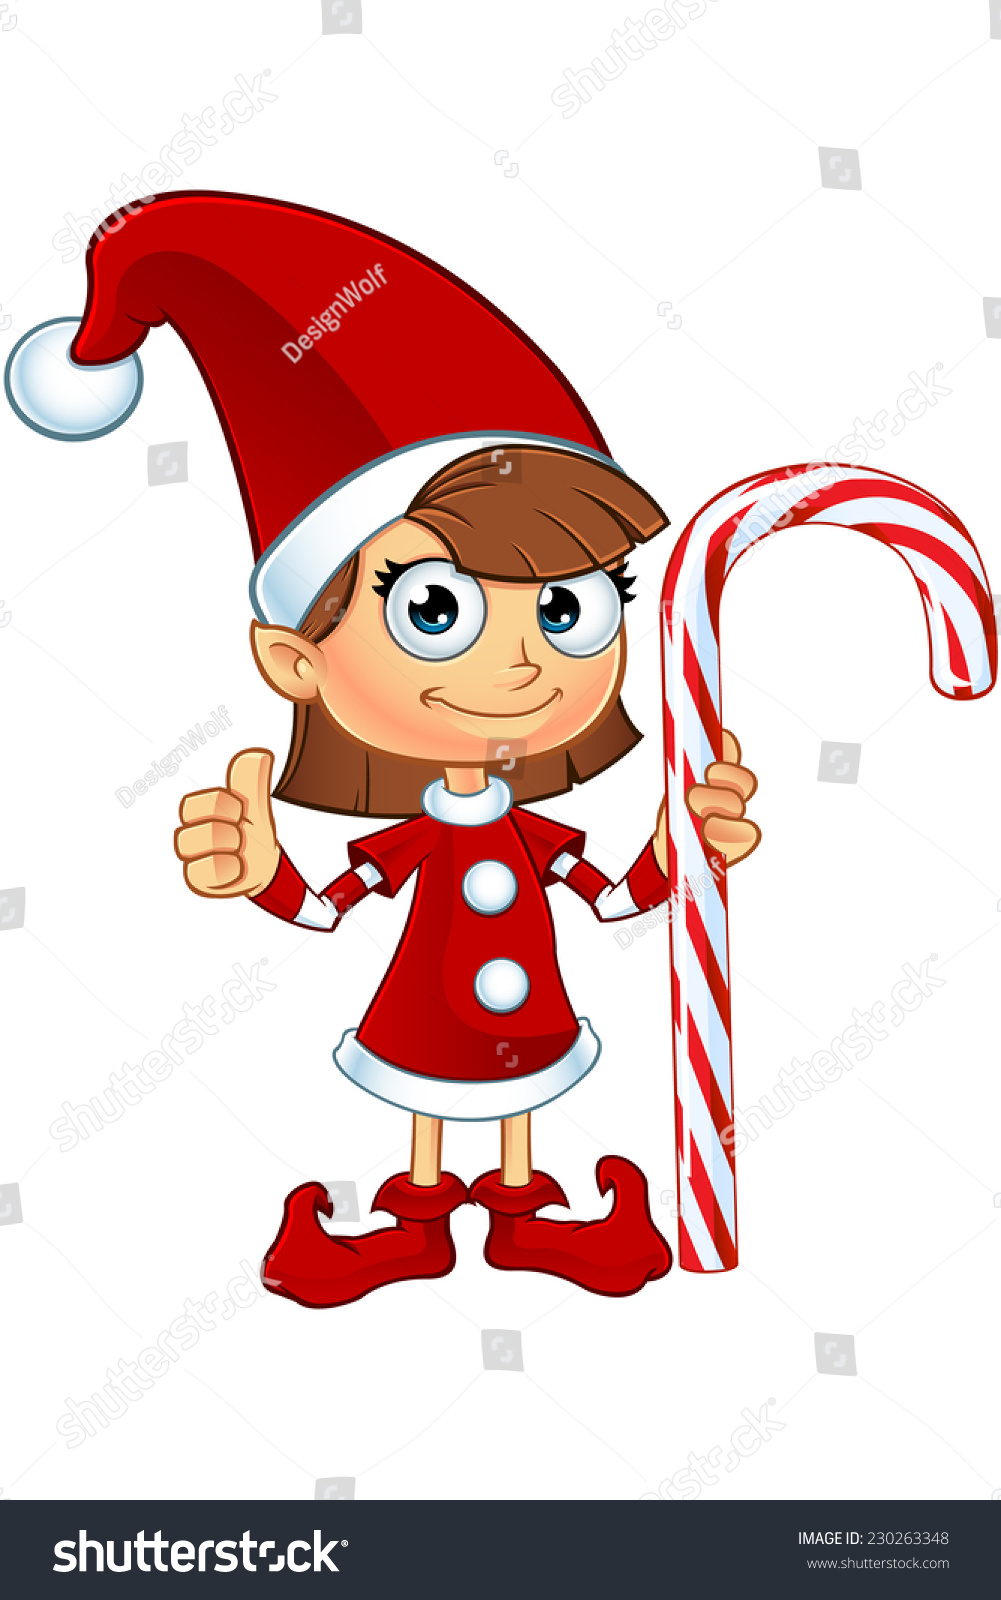 Girl Elf Character Red Holding Candy Stock Vector Royalty Free 230263348 Shutterstock